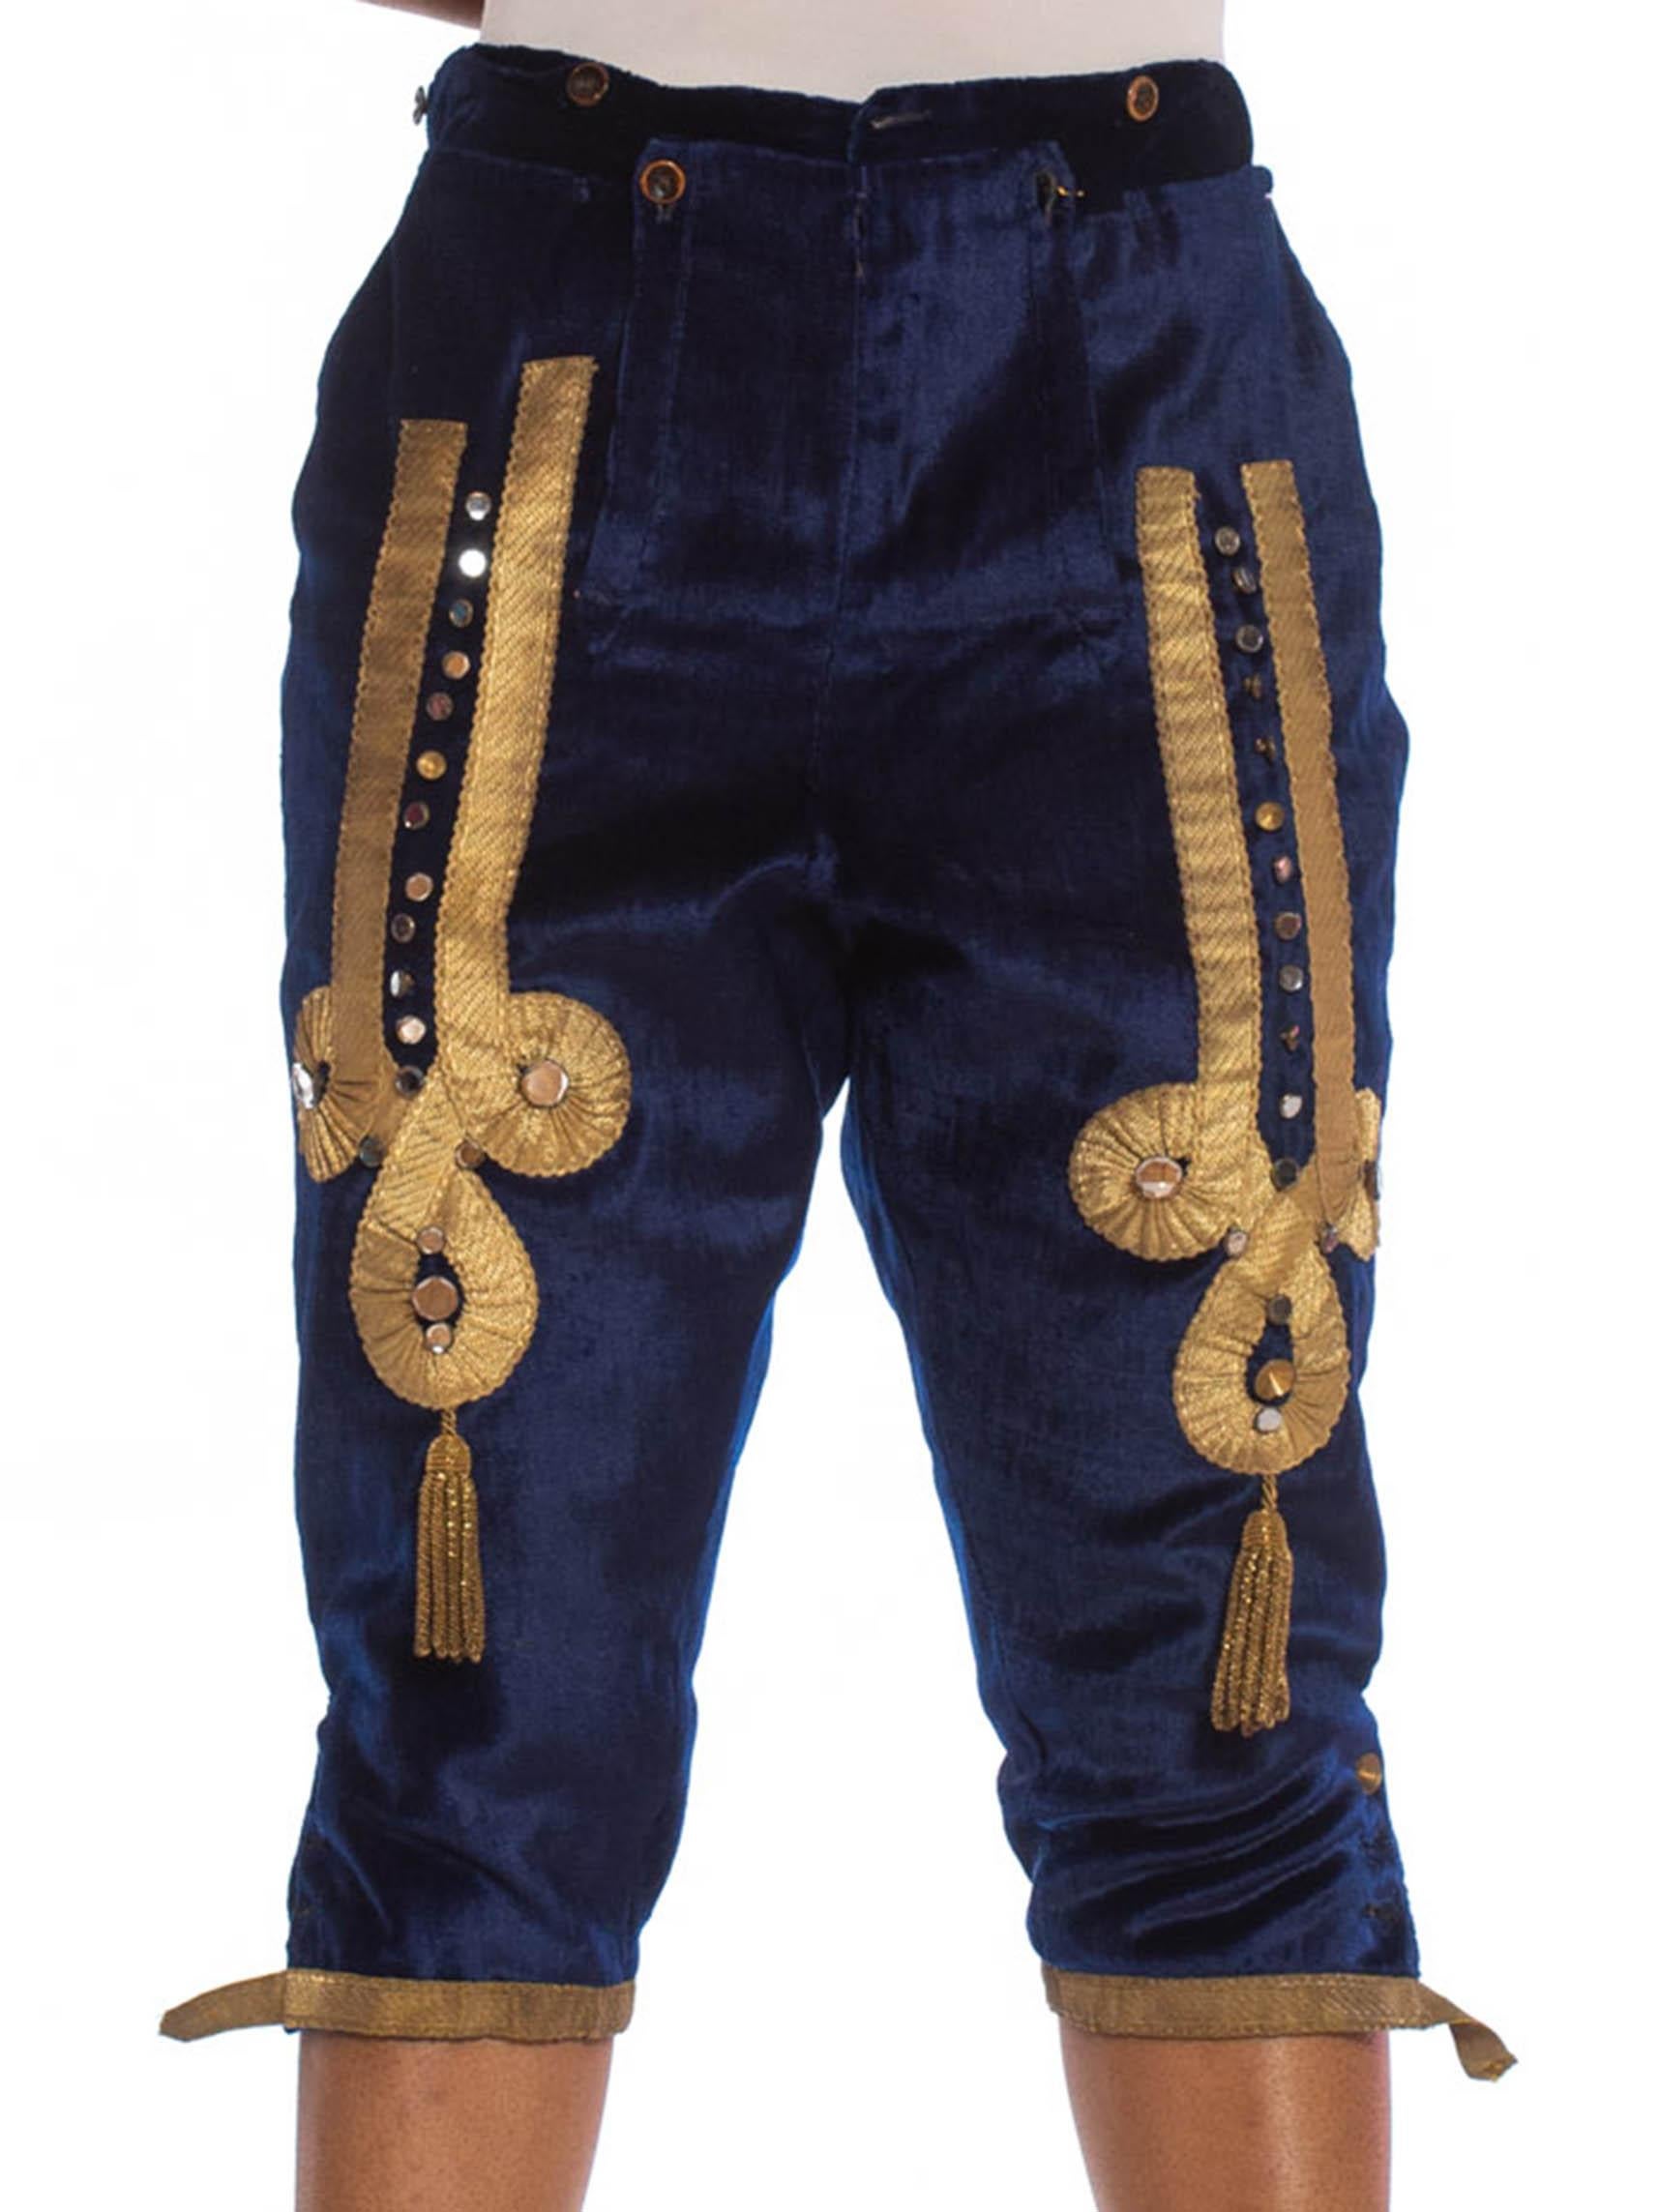 A few small holes and missing buttons however no rot nor stains nor smells. phenomenal condition for being over 200 years old.  Blue  Wool Velvet Men's Antique 1700S Historical Folk Pants With Metallic Embellishments & Tassels 